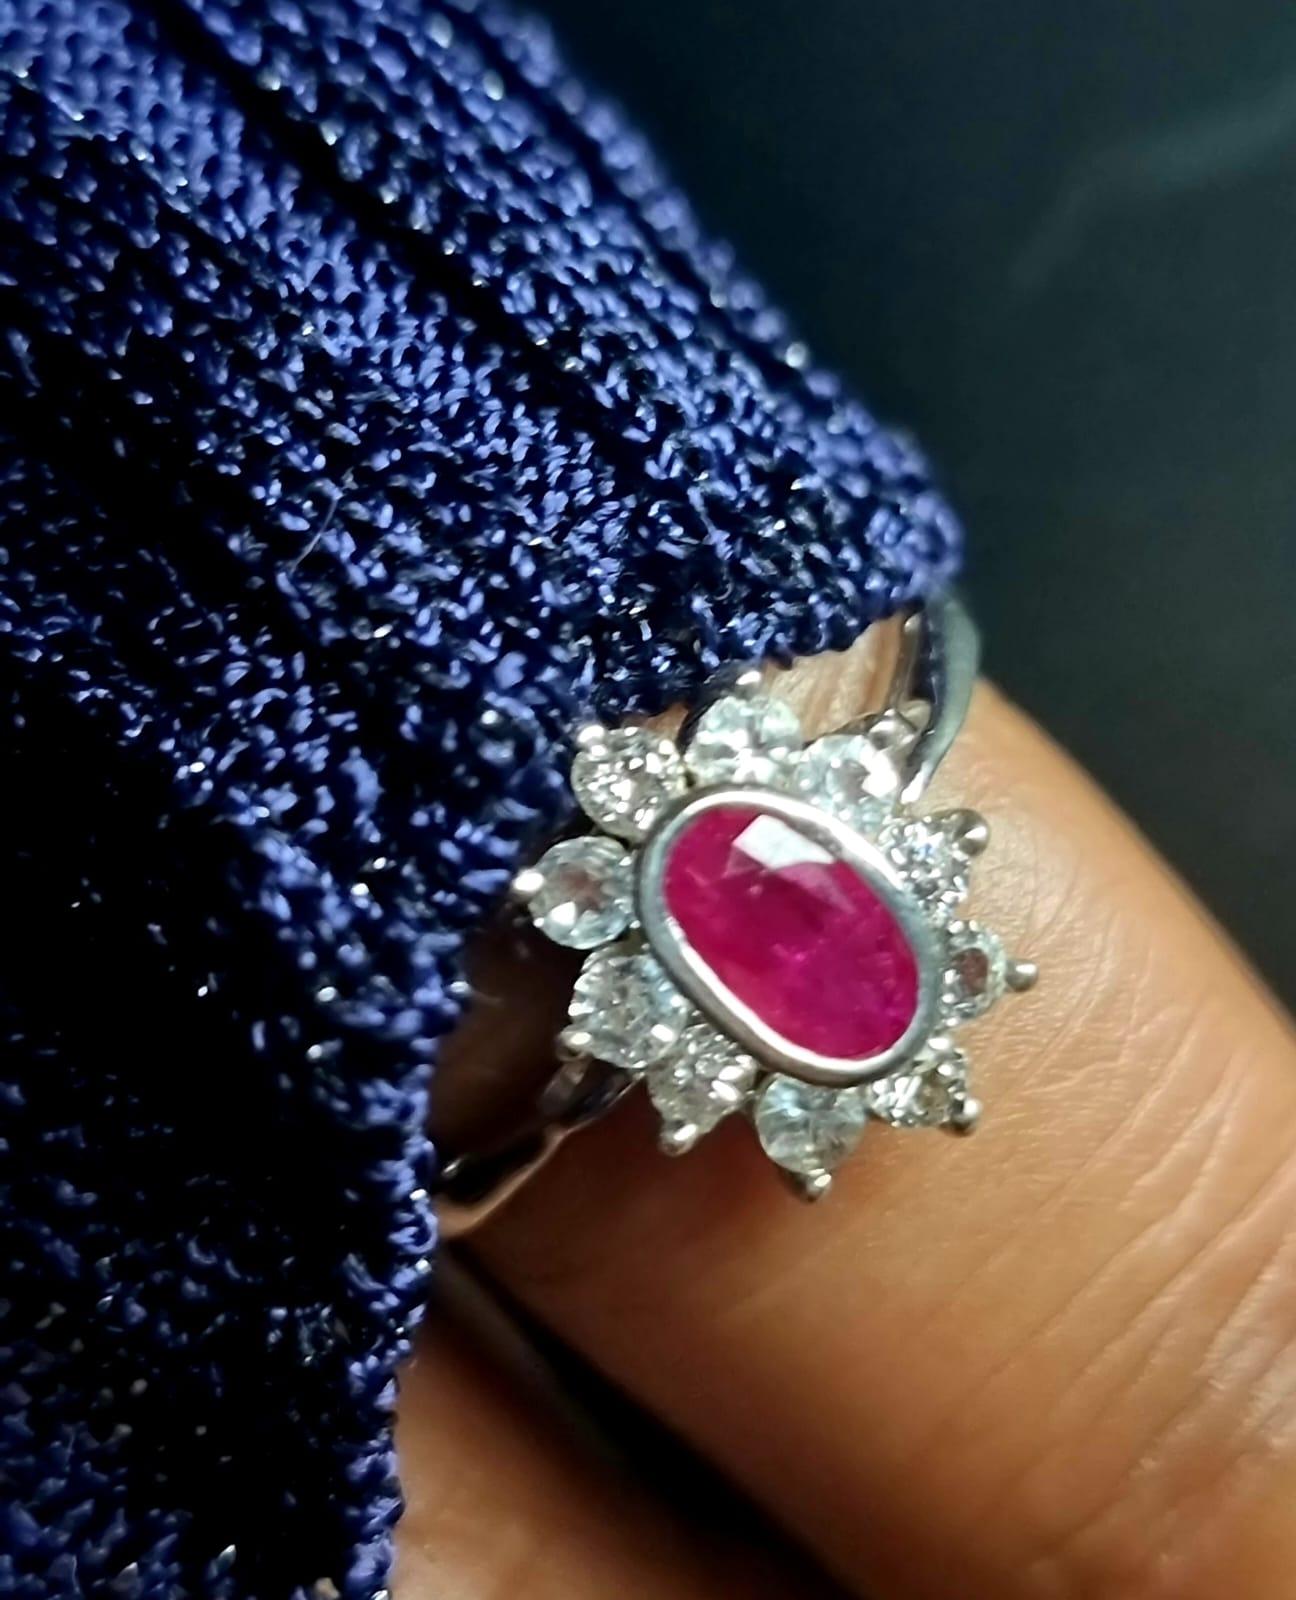 Indulge in the timeless allure of ruby and sapphire combination with this exquisite 1.0ct Oval 100% Natural Ruby Statement Ring surrounded by 3ctw White Sapphire . This beautifully crafted piece is designed to make a statement, combining the pink of